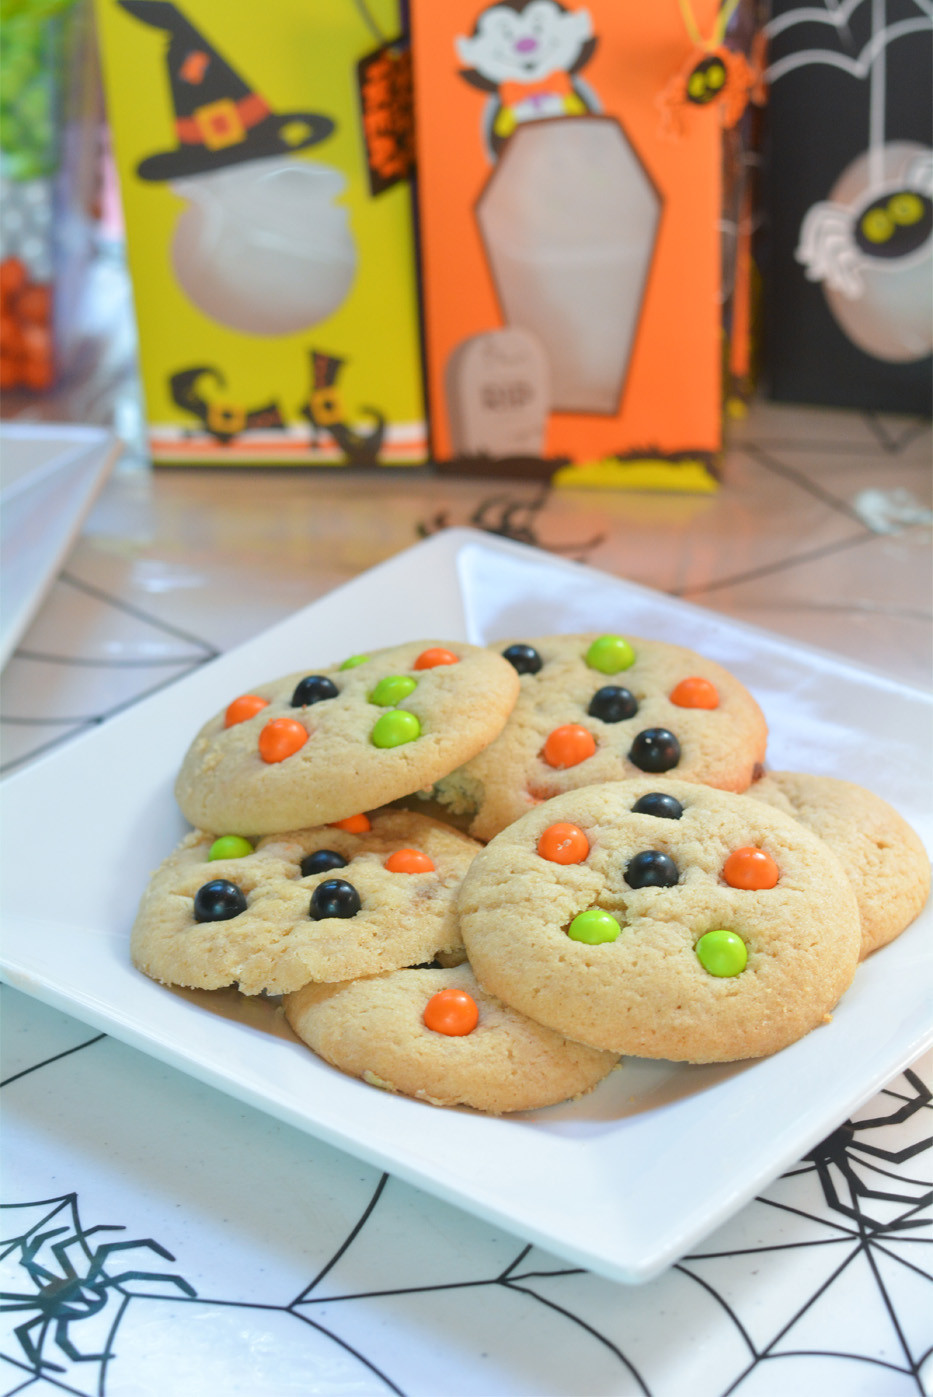 Halloween Cookies Pictures
 Spooky Monster Cookies Mommy s Fabulous Finds